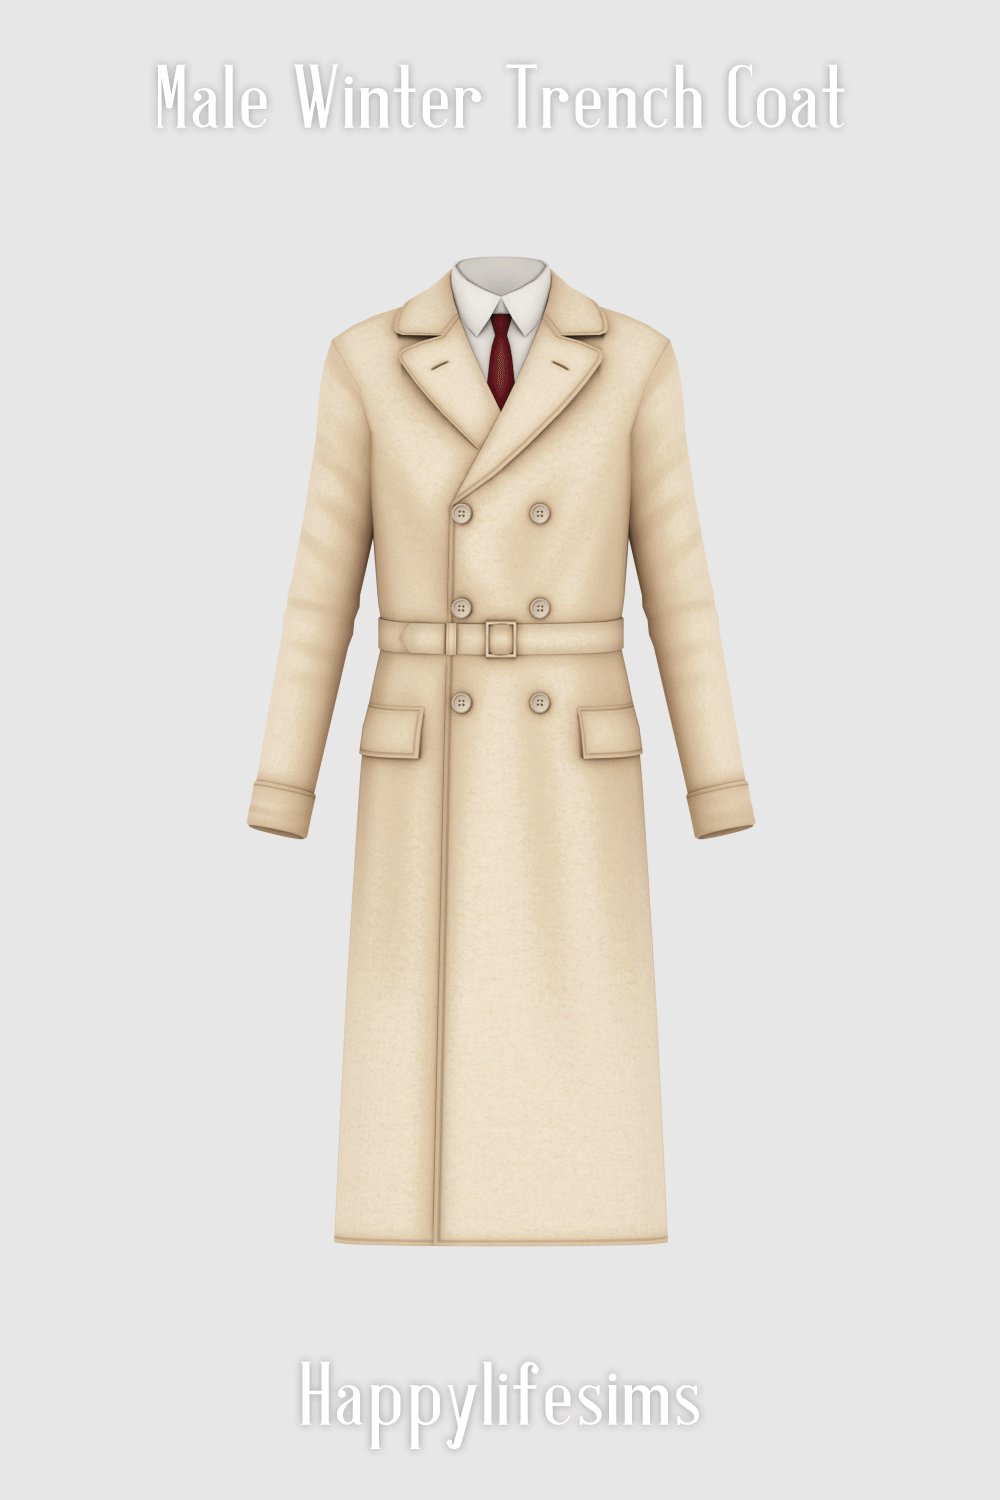 Male Winter Trench Coat